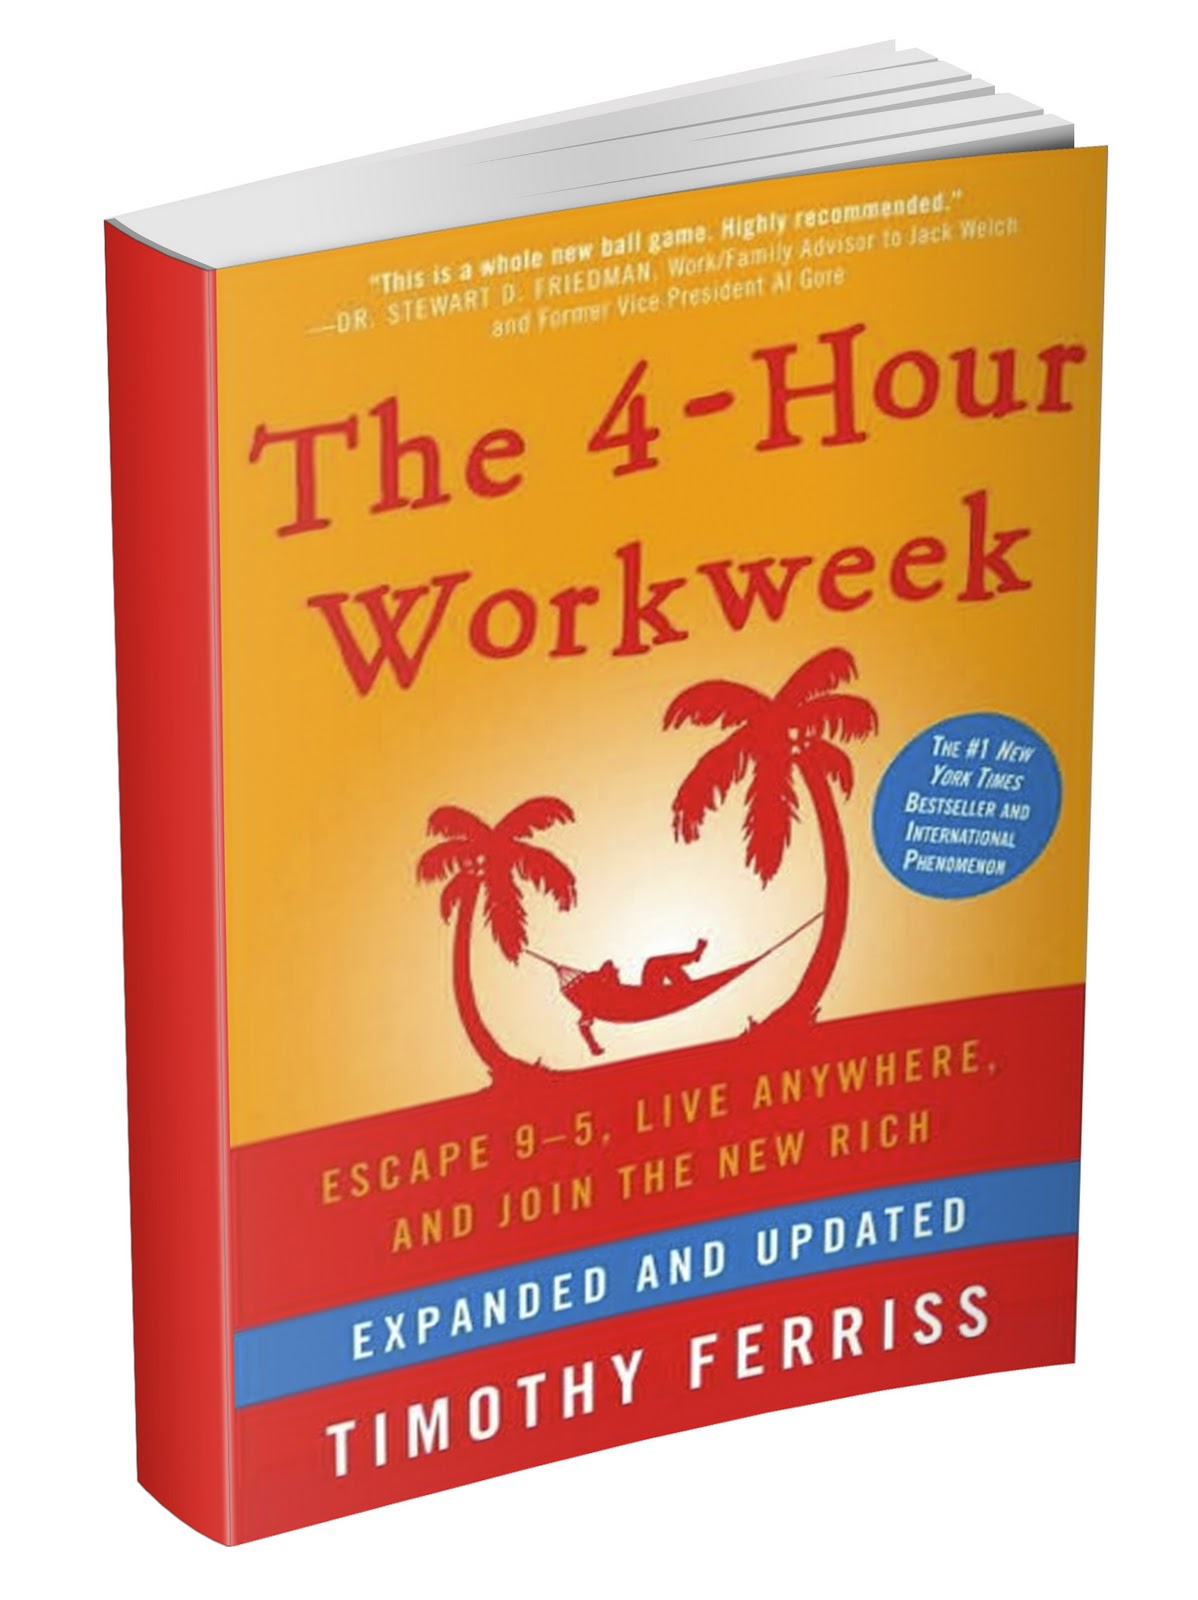 Timothy Ferriss “The 4-Hour Workweek: Escape 9-5, Live Anywhere, and Join the New Rich”